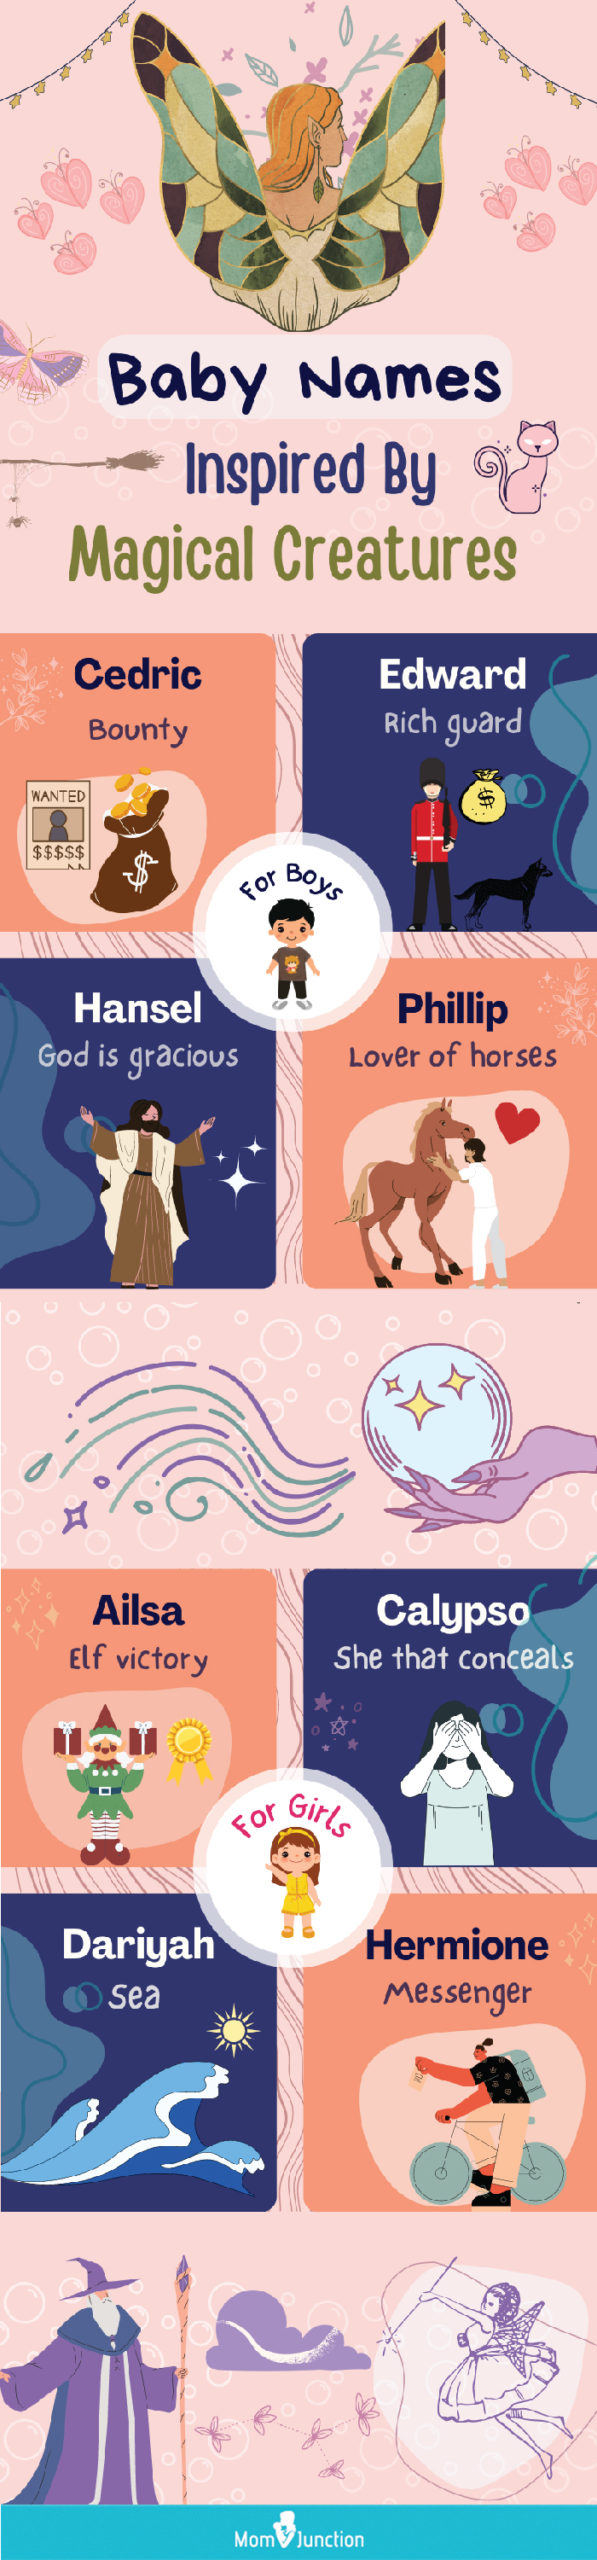 magical names for boys and girls [infographic]